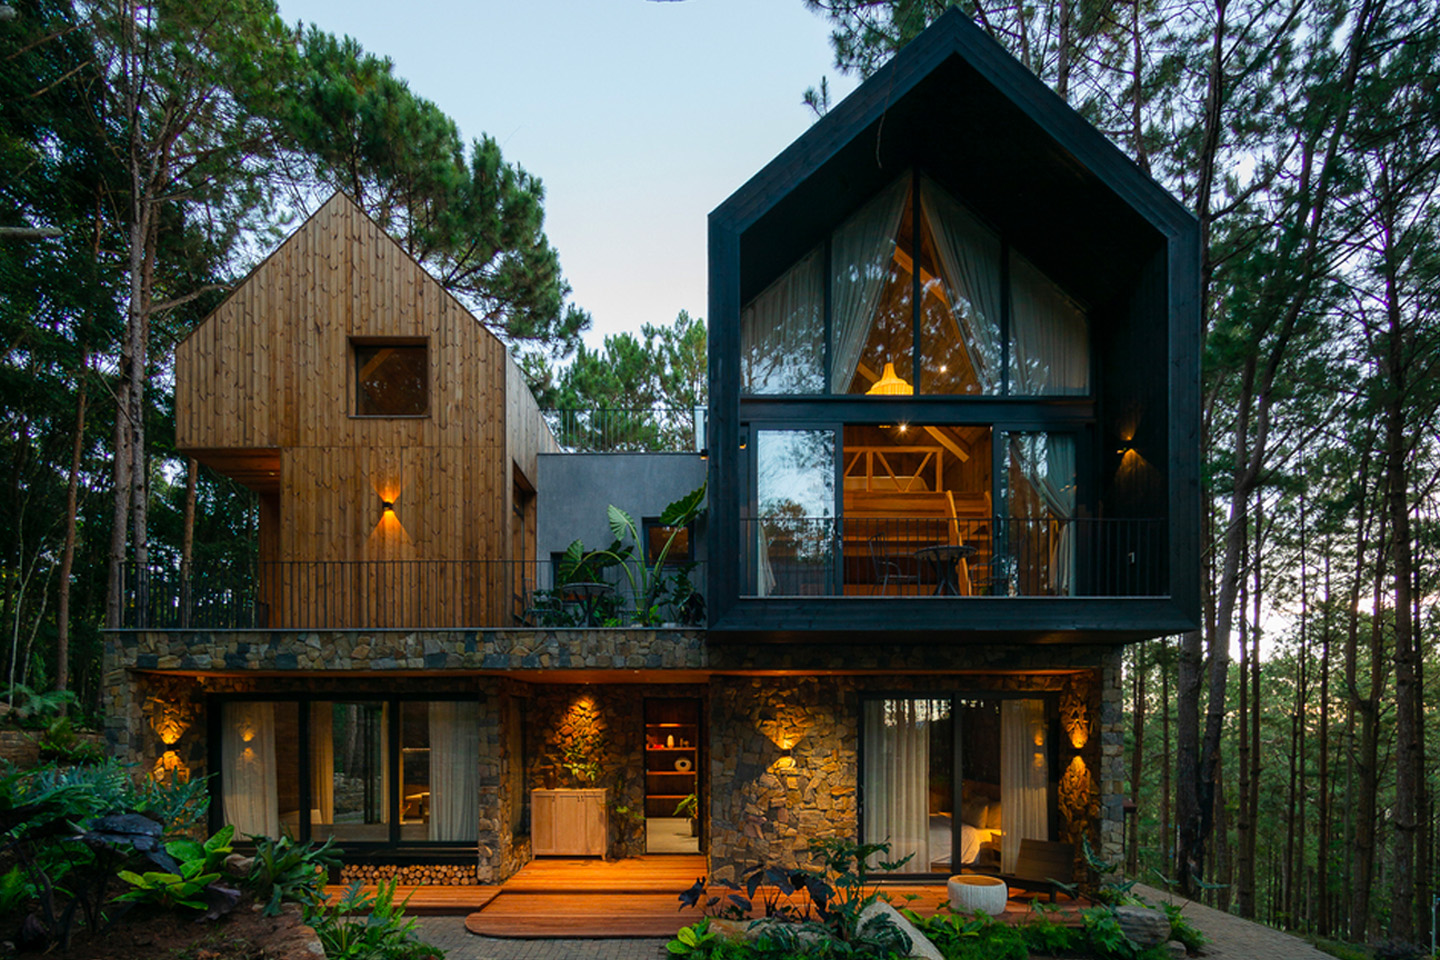 #This quaint wooden villa in the Vietnam countryside encourages a serene human-nature connection